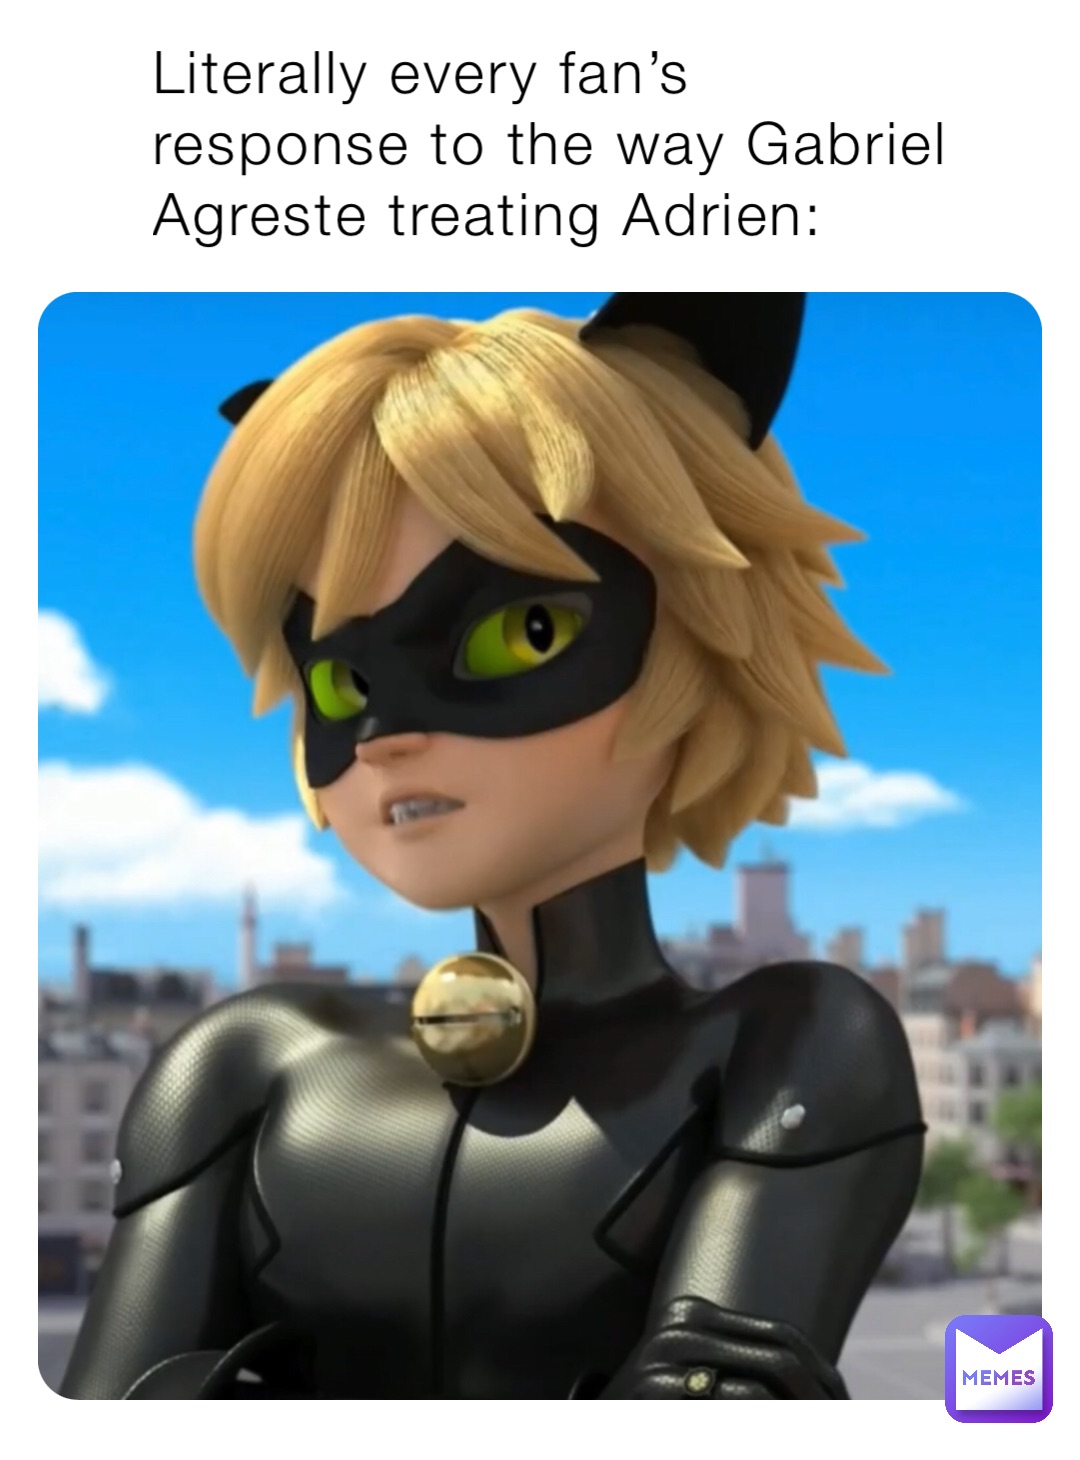 Literally every fan’s response to the way Gabriel Agreste treating Adrien: